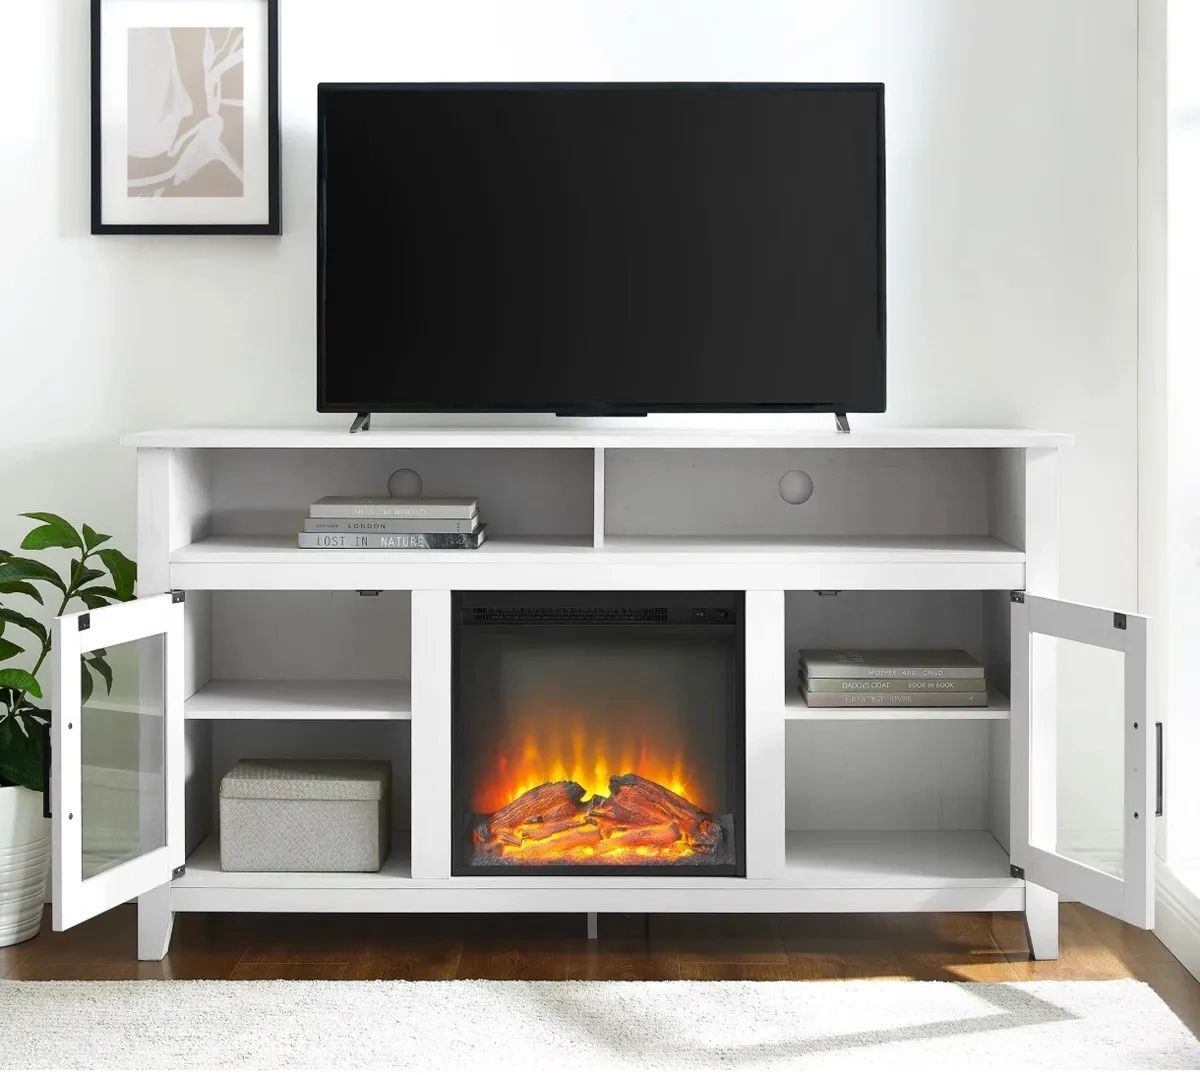 Woven Paths Highboy 2 Door Electric Fireplace Tv Stand For Tvs Up To 65",  Brushe | Ebay Throughout Wood Highboy Fireplace Tv Stands (View 10 of 15)